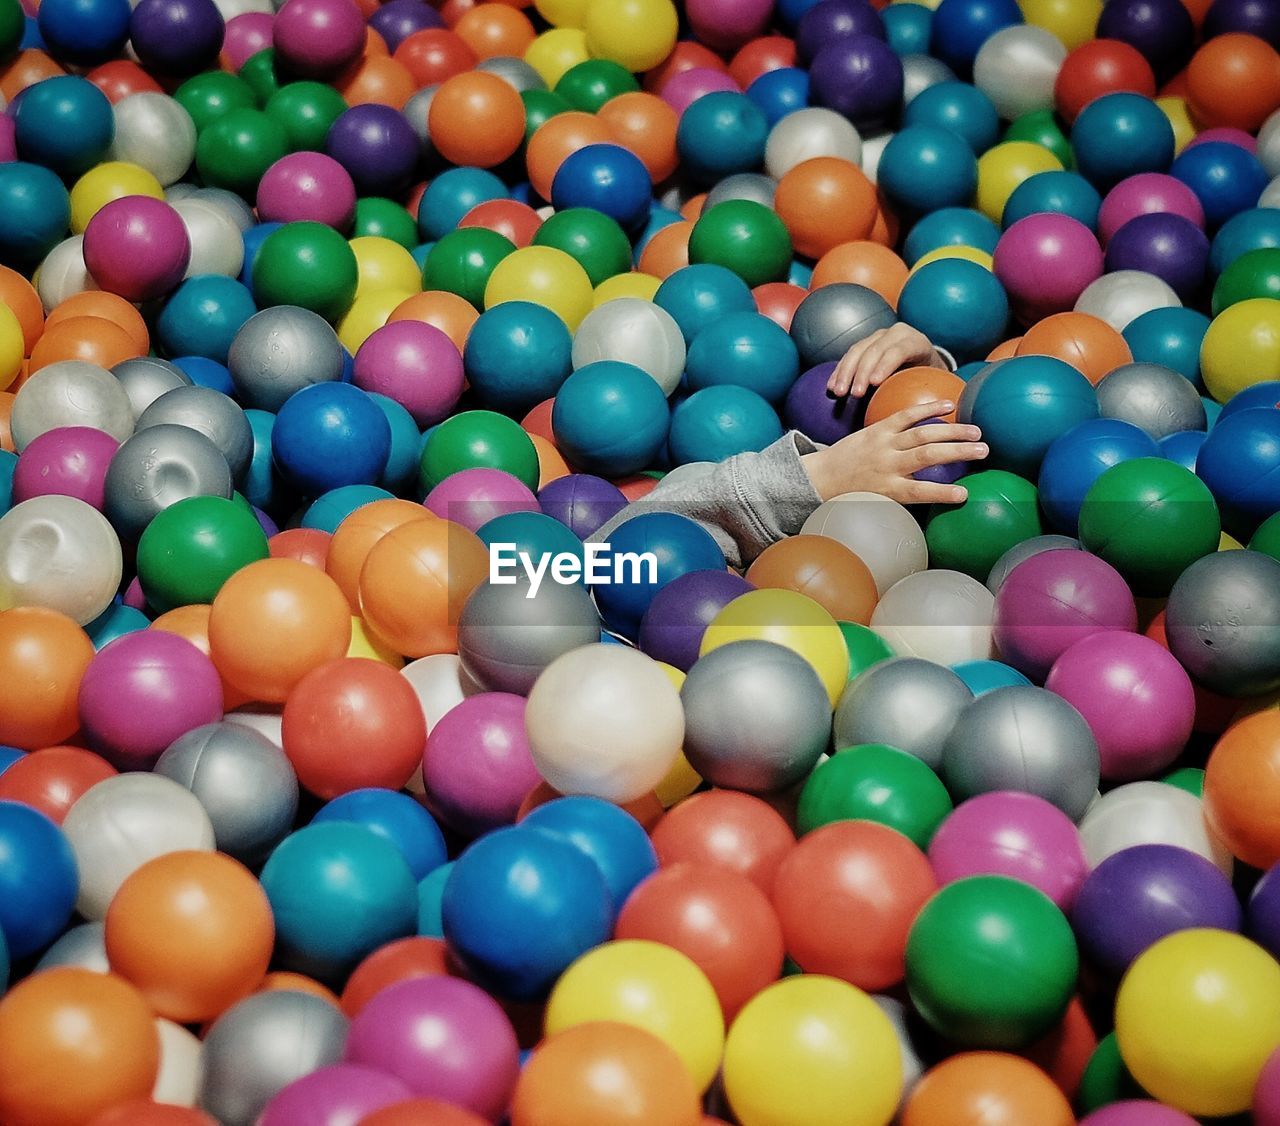 Cropped hands of child amidst colorful ball pool